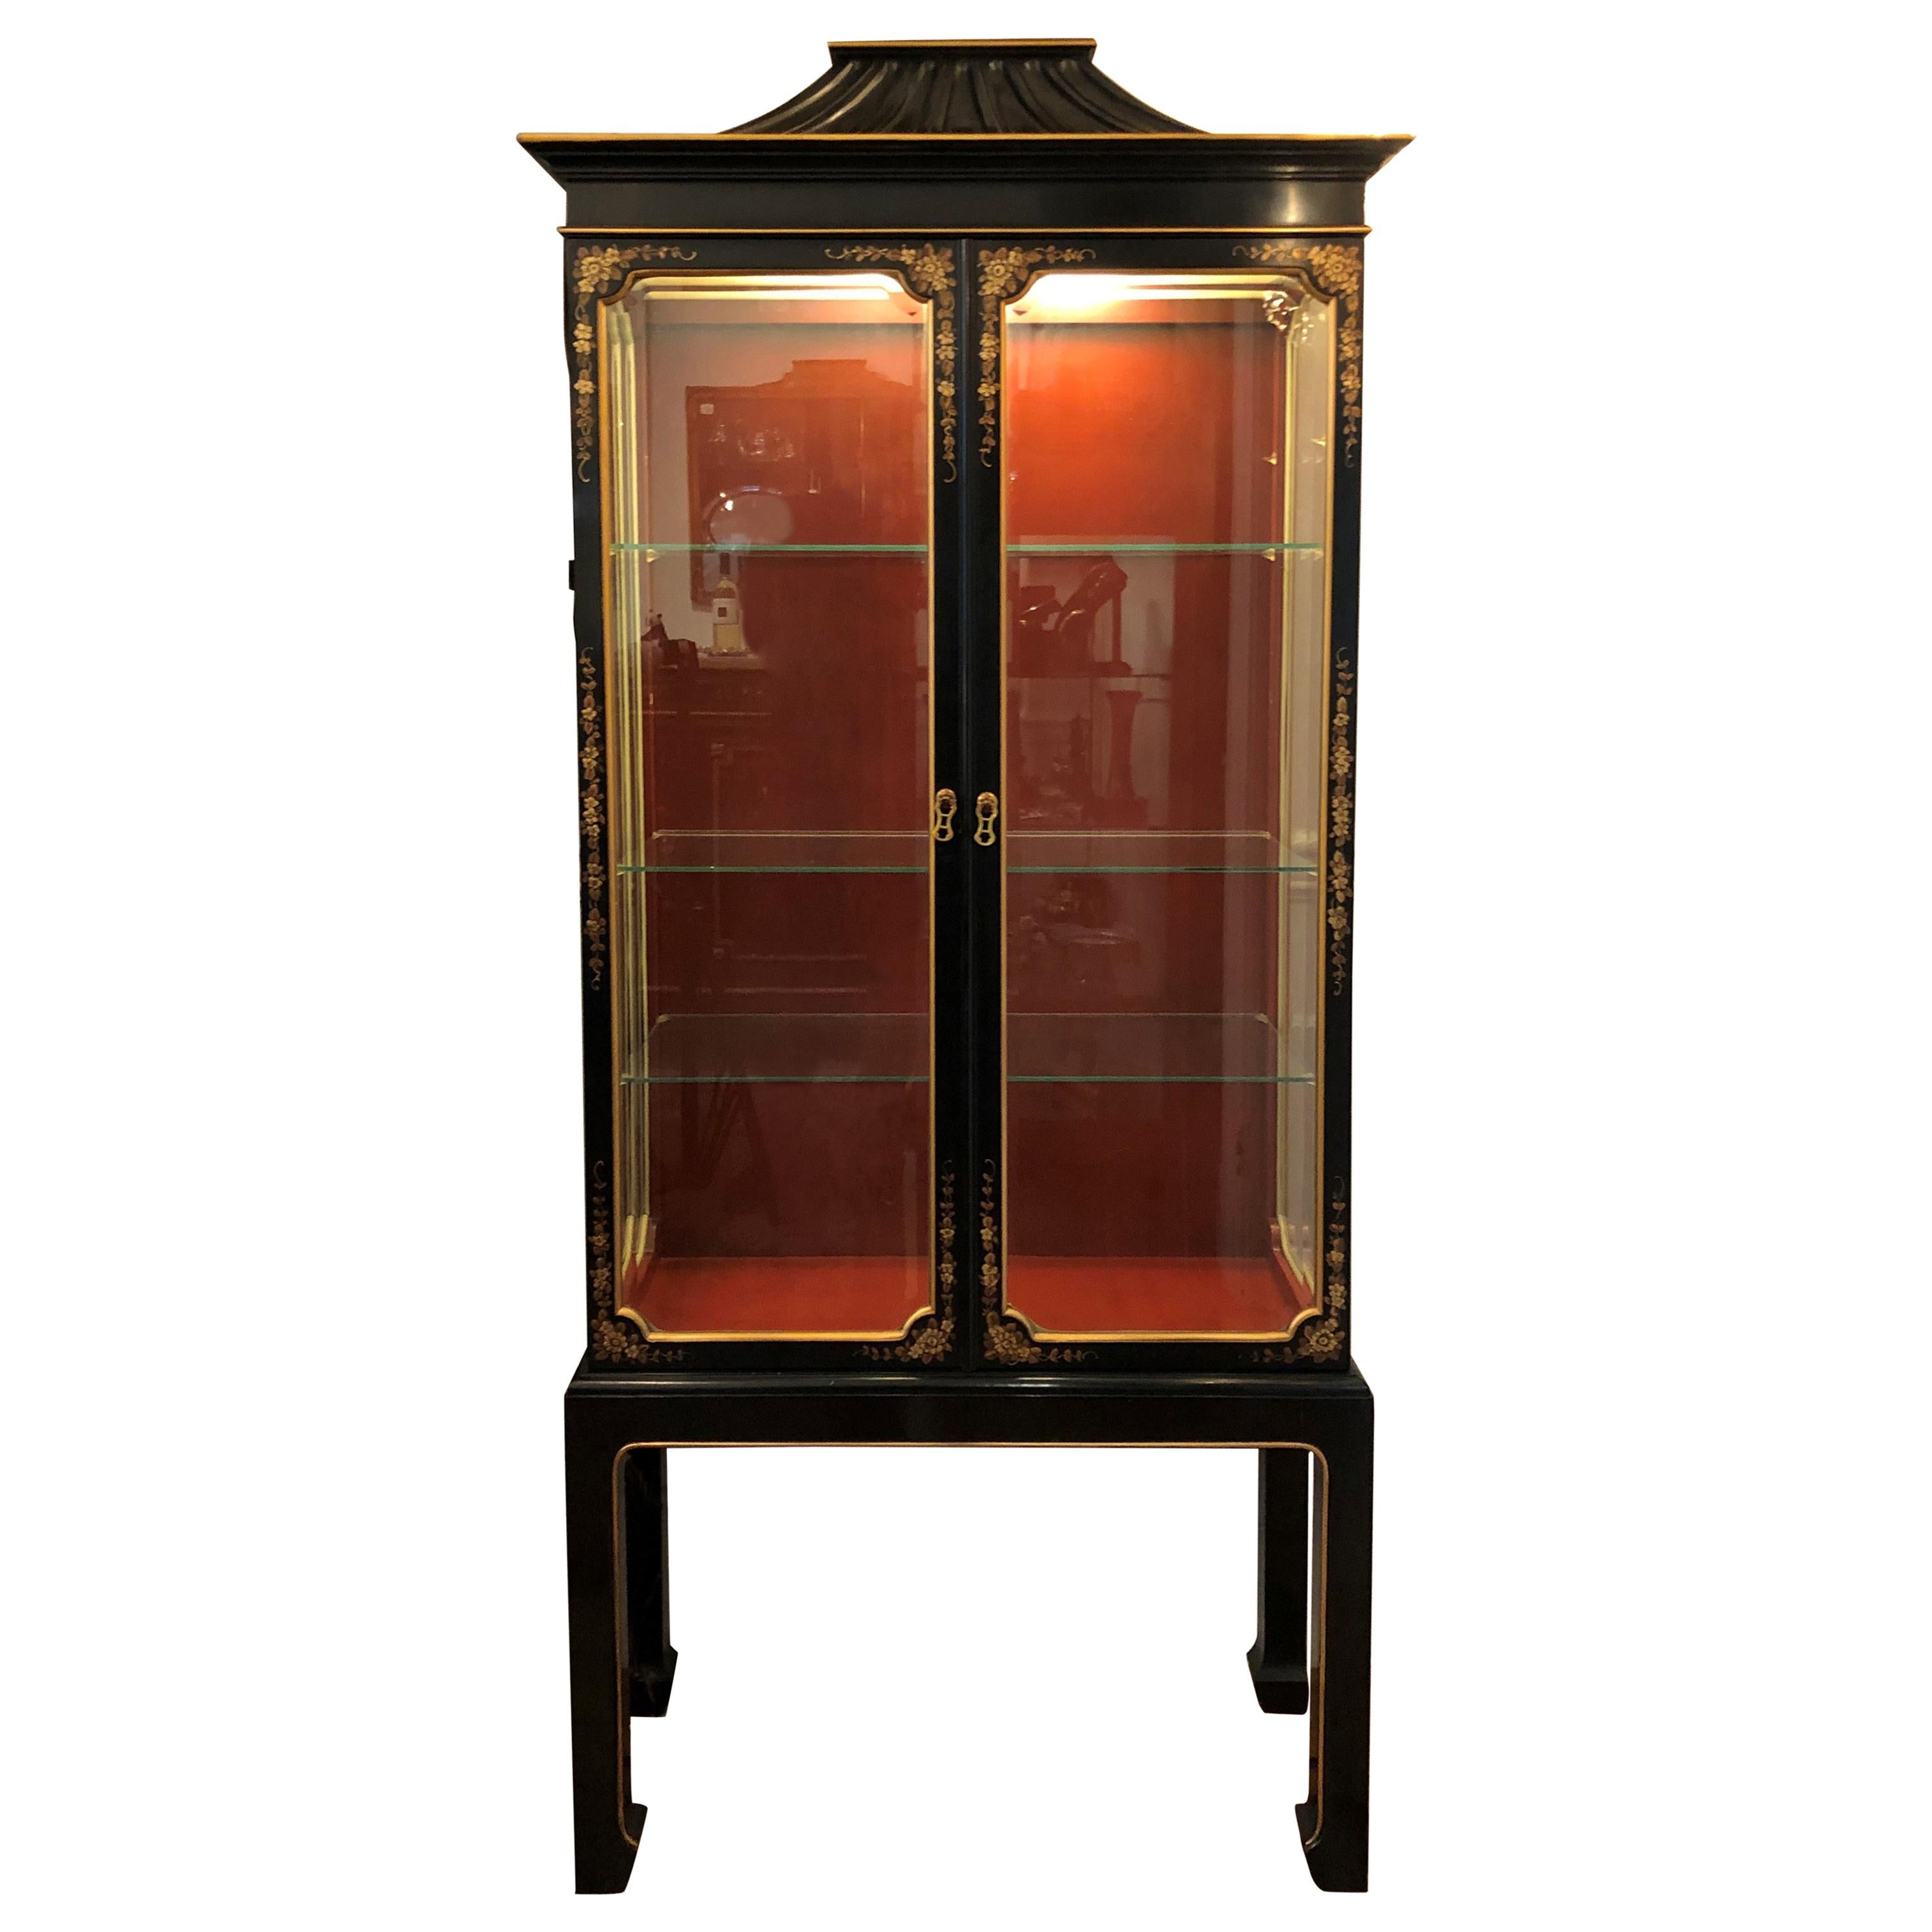 Chinoiserie Display Cabinet, Lit, with Red Interior, Vitrine, Midcentury, Black